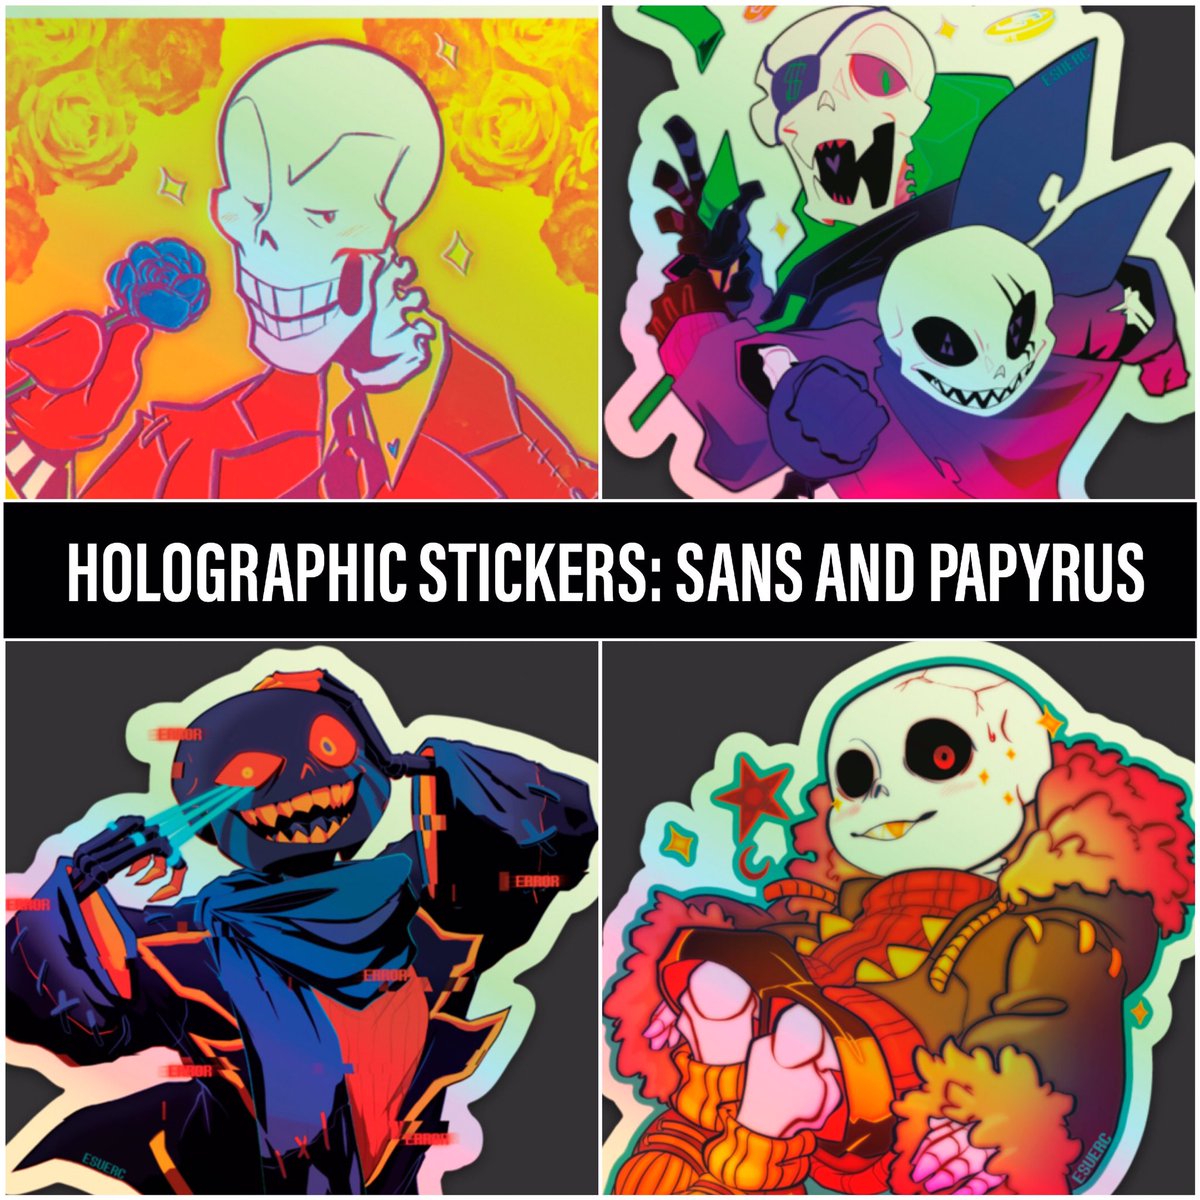 My new Undertale AU sticker designs are now available! Holographic stickers are restocked, as well as older designs!
New designs available! International orders OK!
#undertaleAU

SHOP: https://t.co/An36tYMzUC 